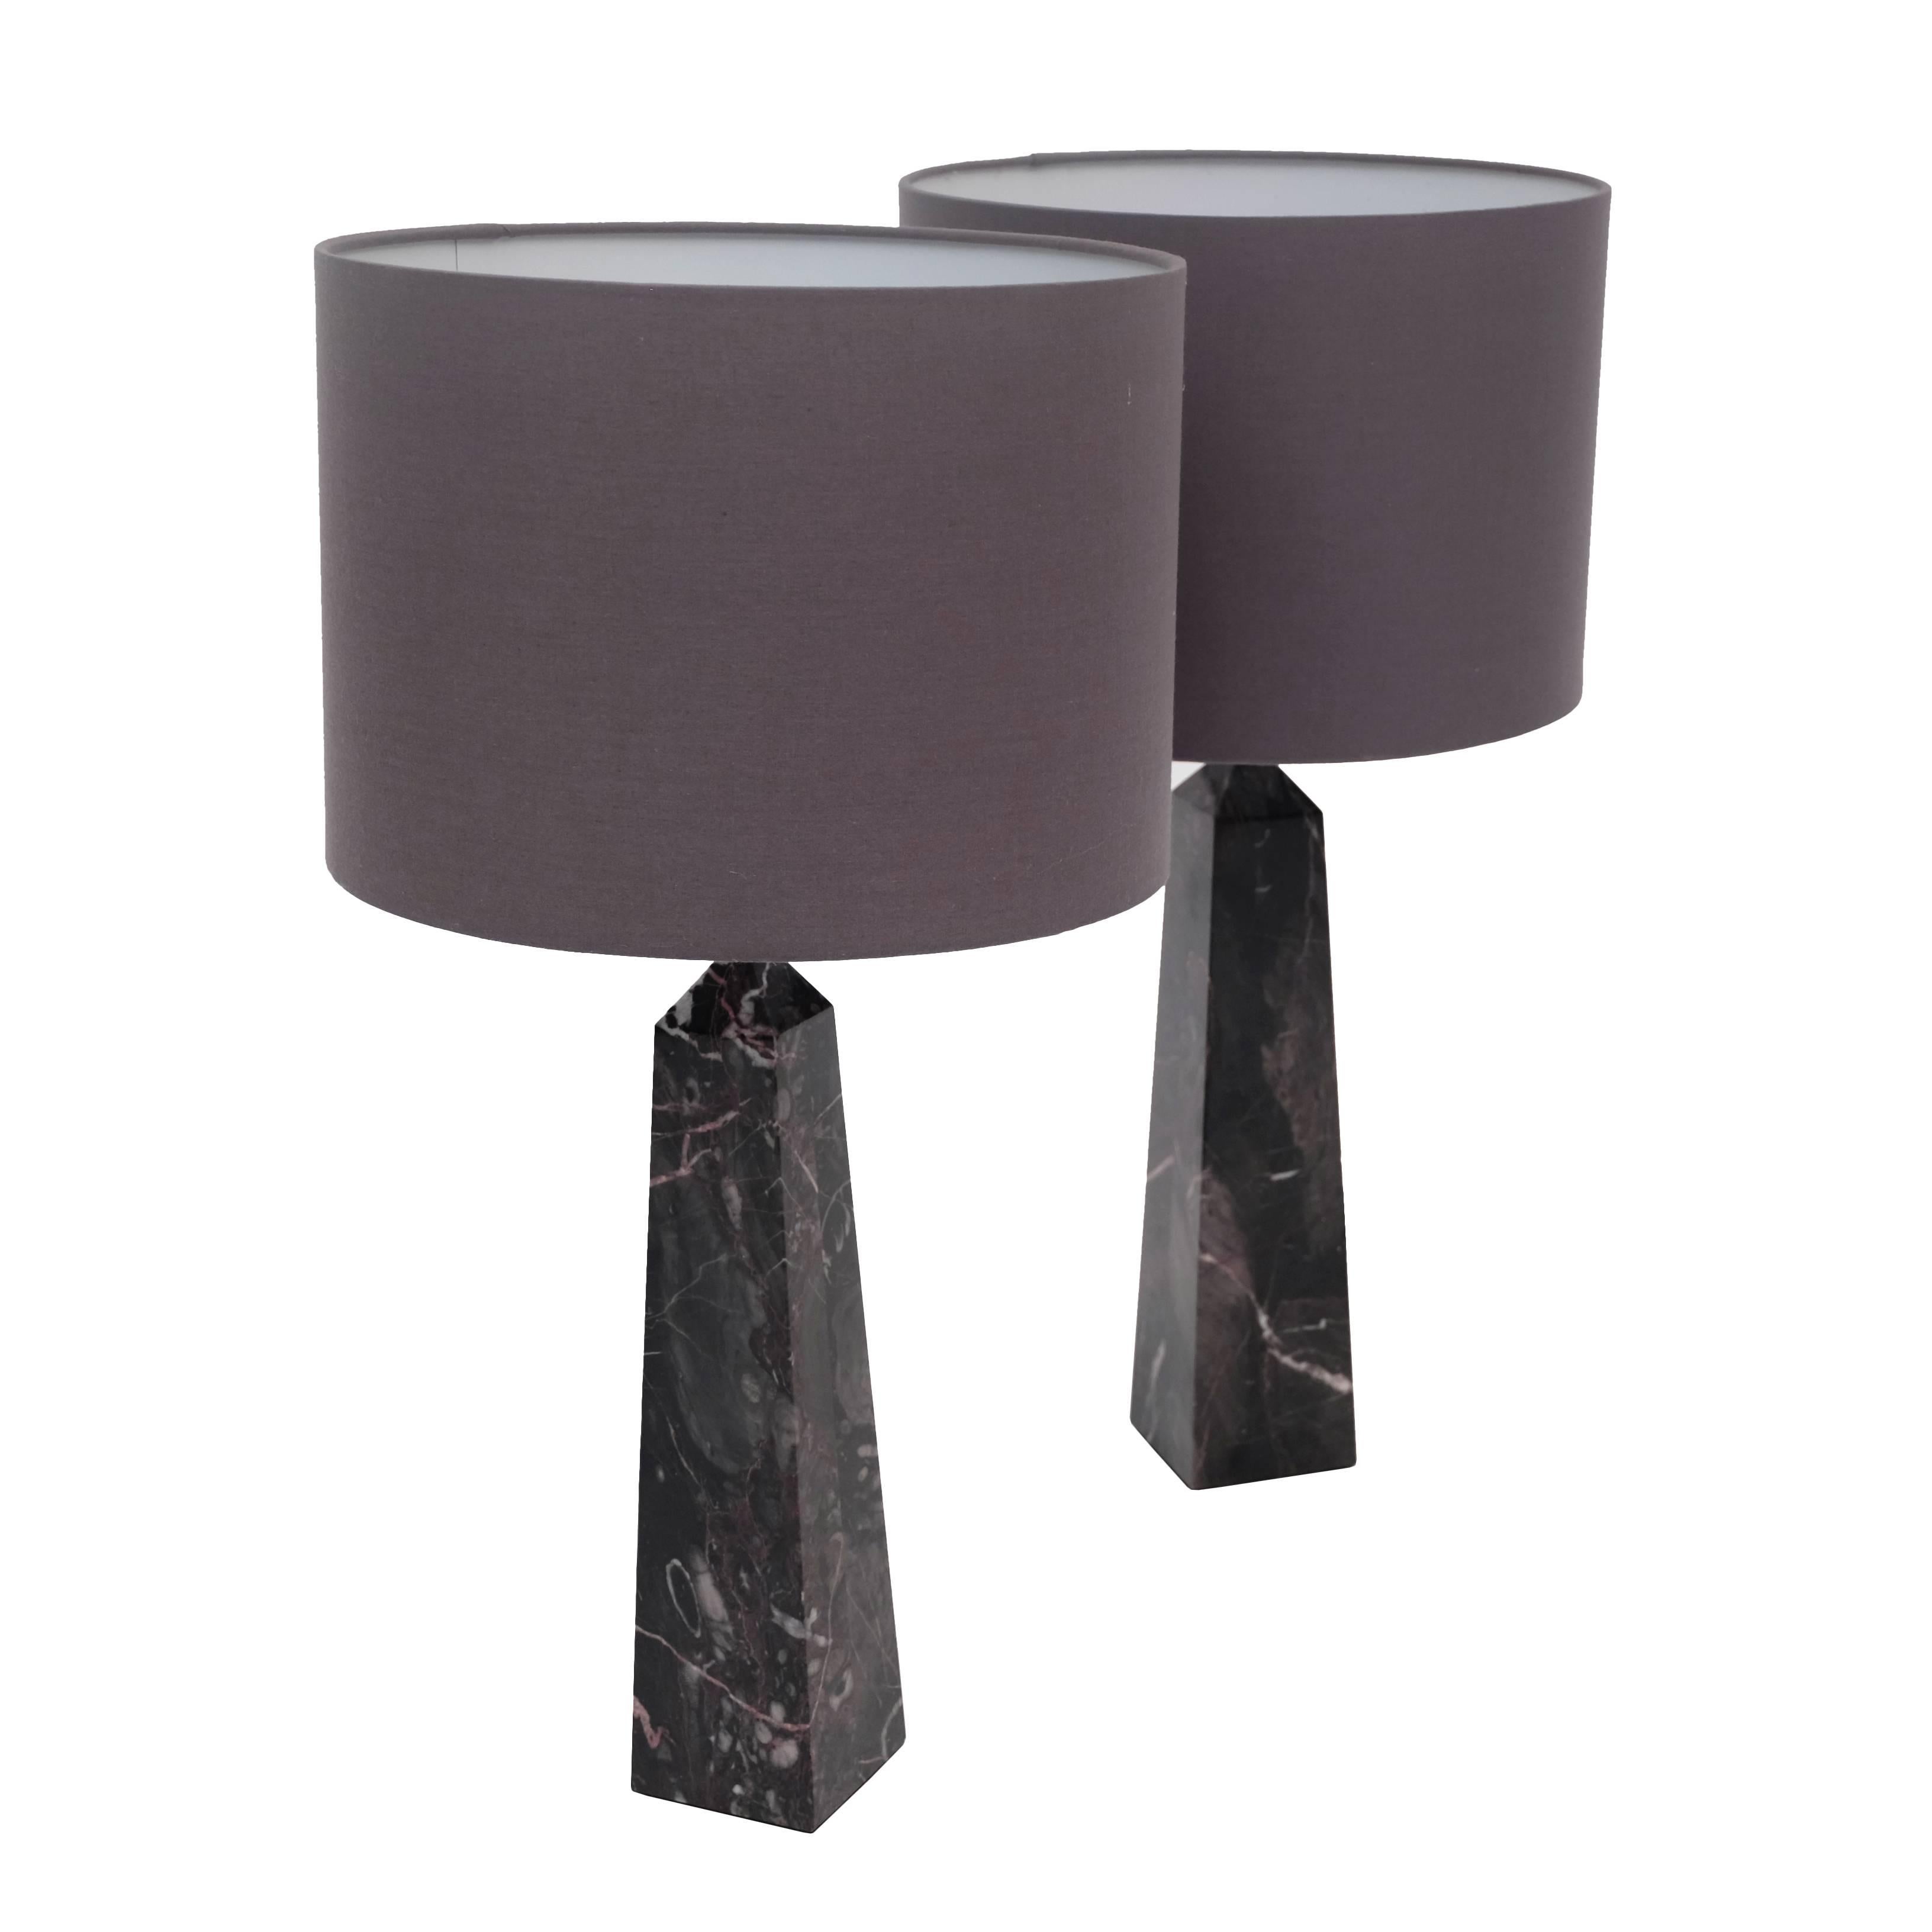 Pair of 1960s table lamps designed and manufactured in Italy.
Portoro marble obelisk bases. Grey cotton shades.

Measures: H 55cm x D 28cm.
H (without shade): 40cm x W 7.5cm.

